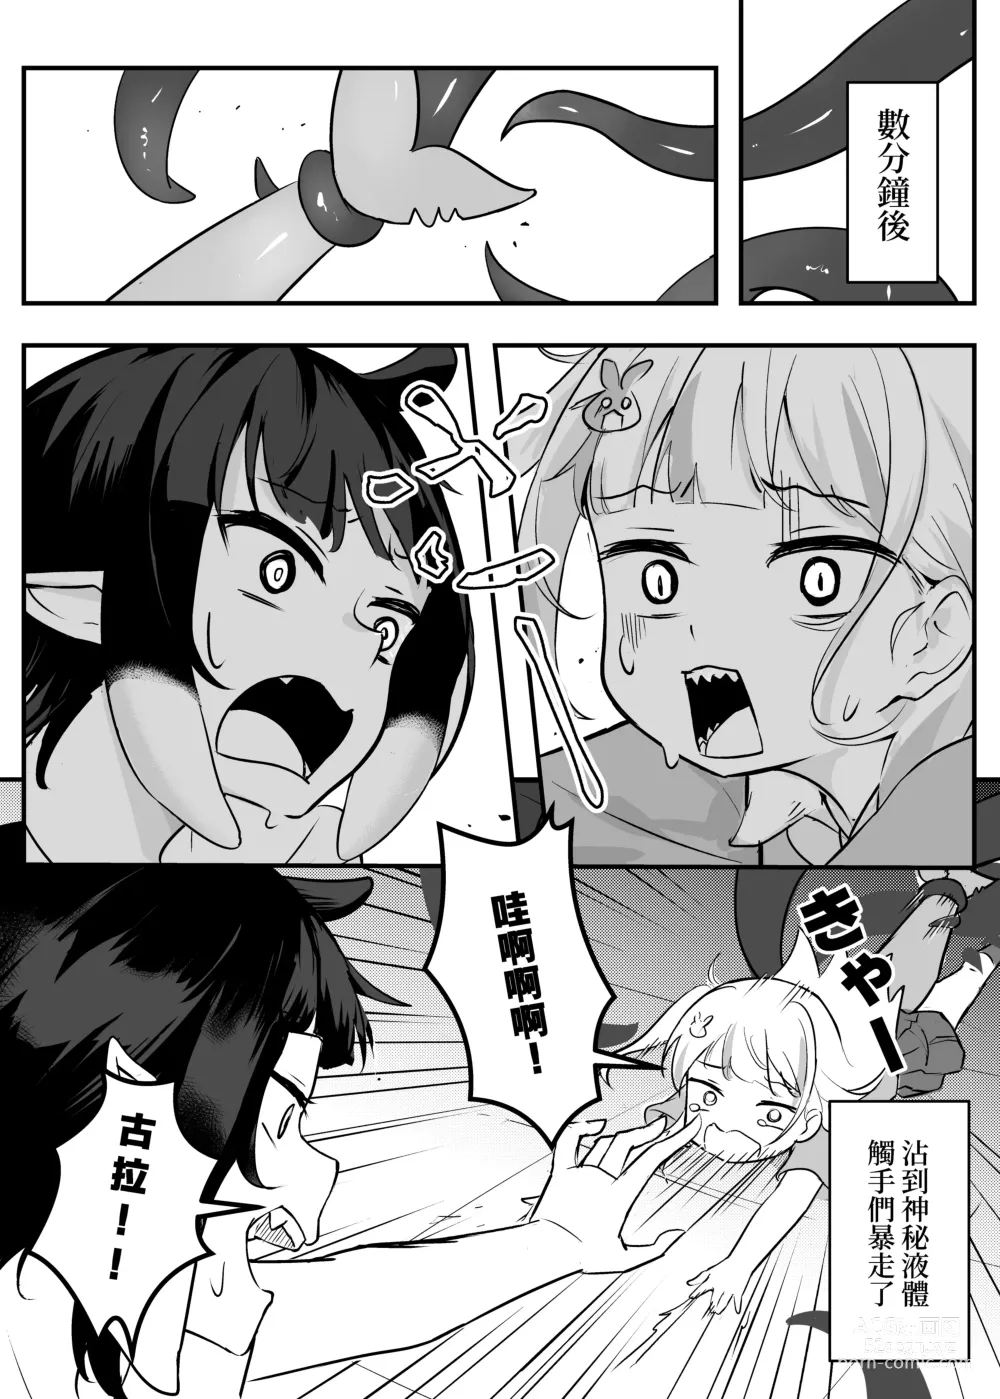 Page 6 of doujinshi On the verge of breaking out